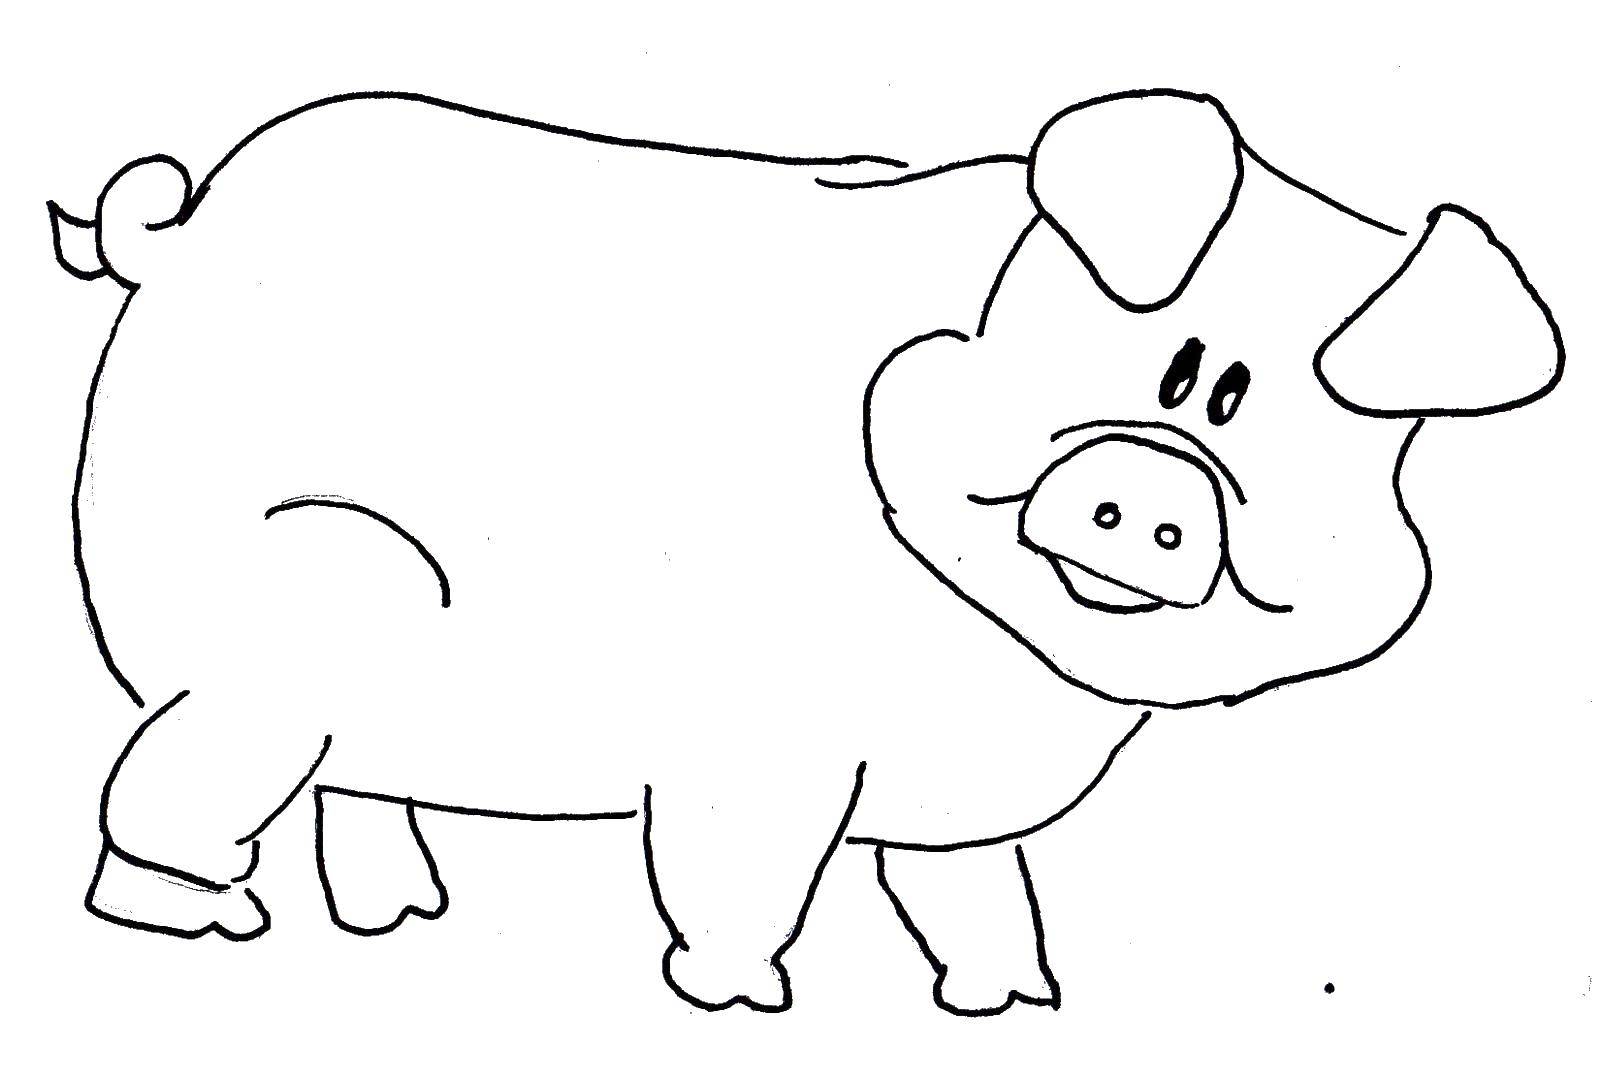 Coloring Pig. Category Animals. Tags:  Animals, pig.